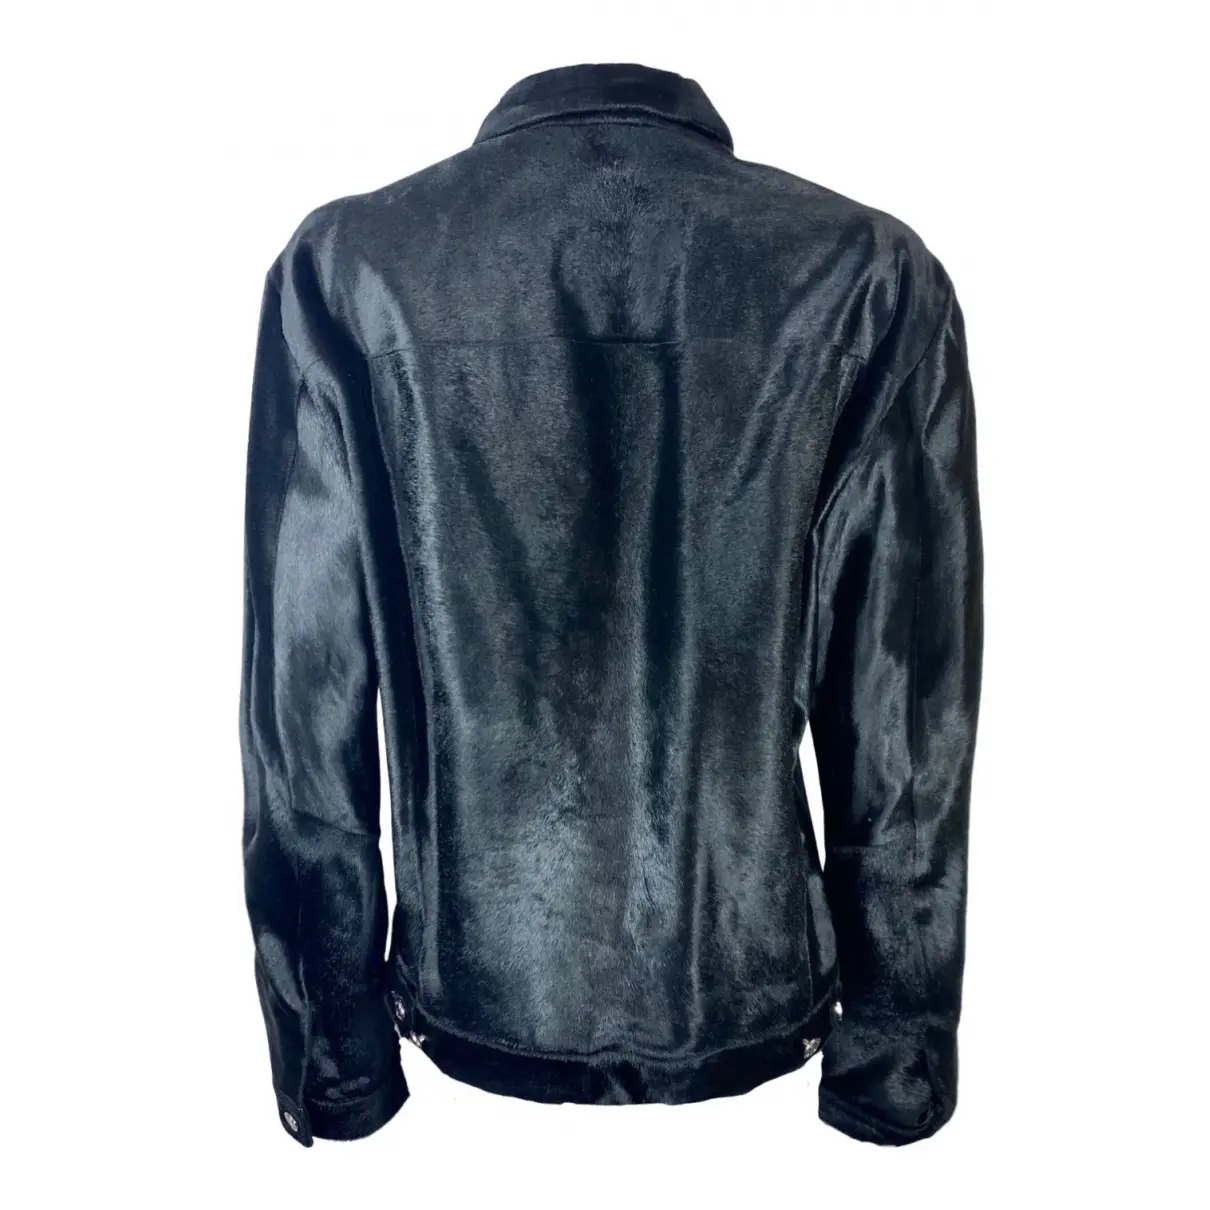 Buy Blood Brother Leather jacket online